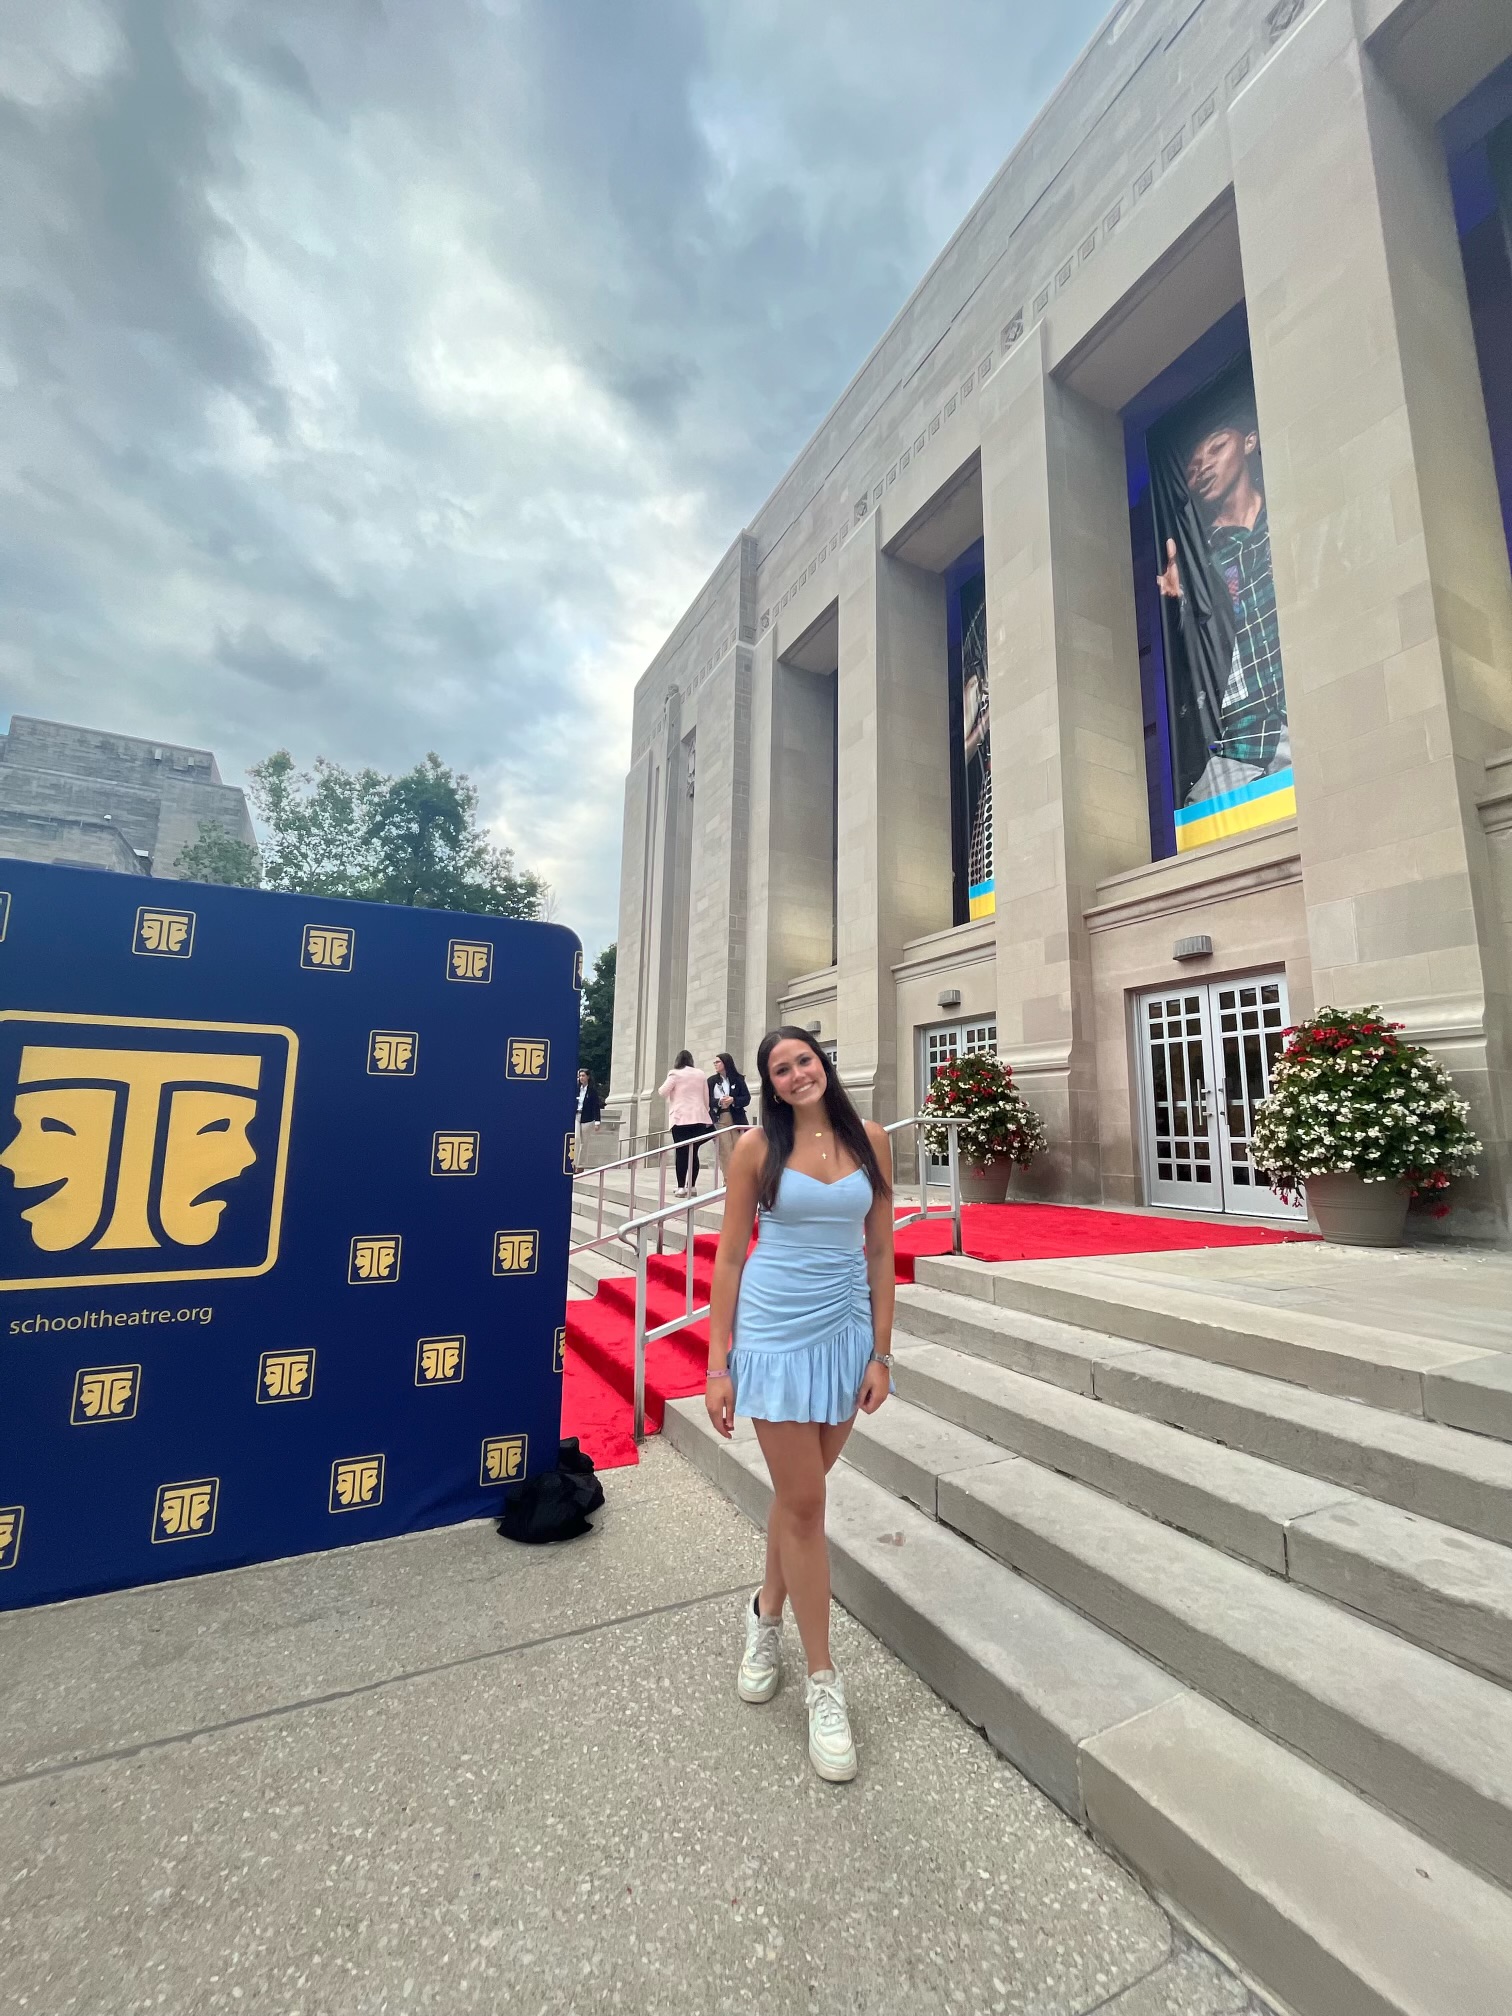 Camila Patino at Nationals in June 2023 at Indiana University. She is attending the closing ceremonies, where the awards will be presented, with almost 6000 people from schools around the country.